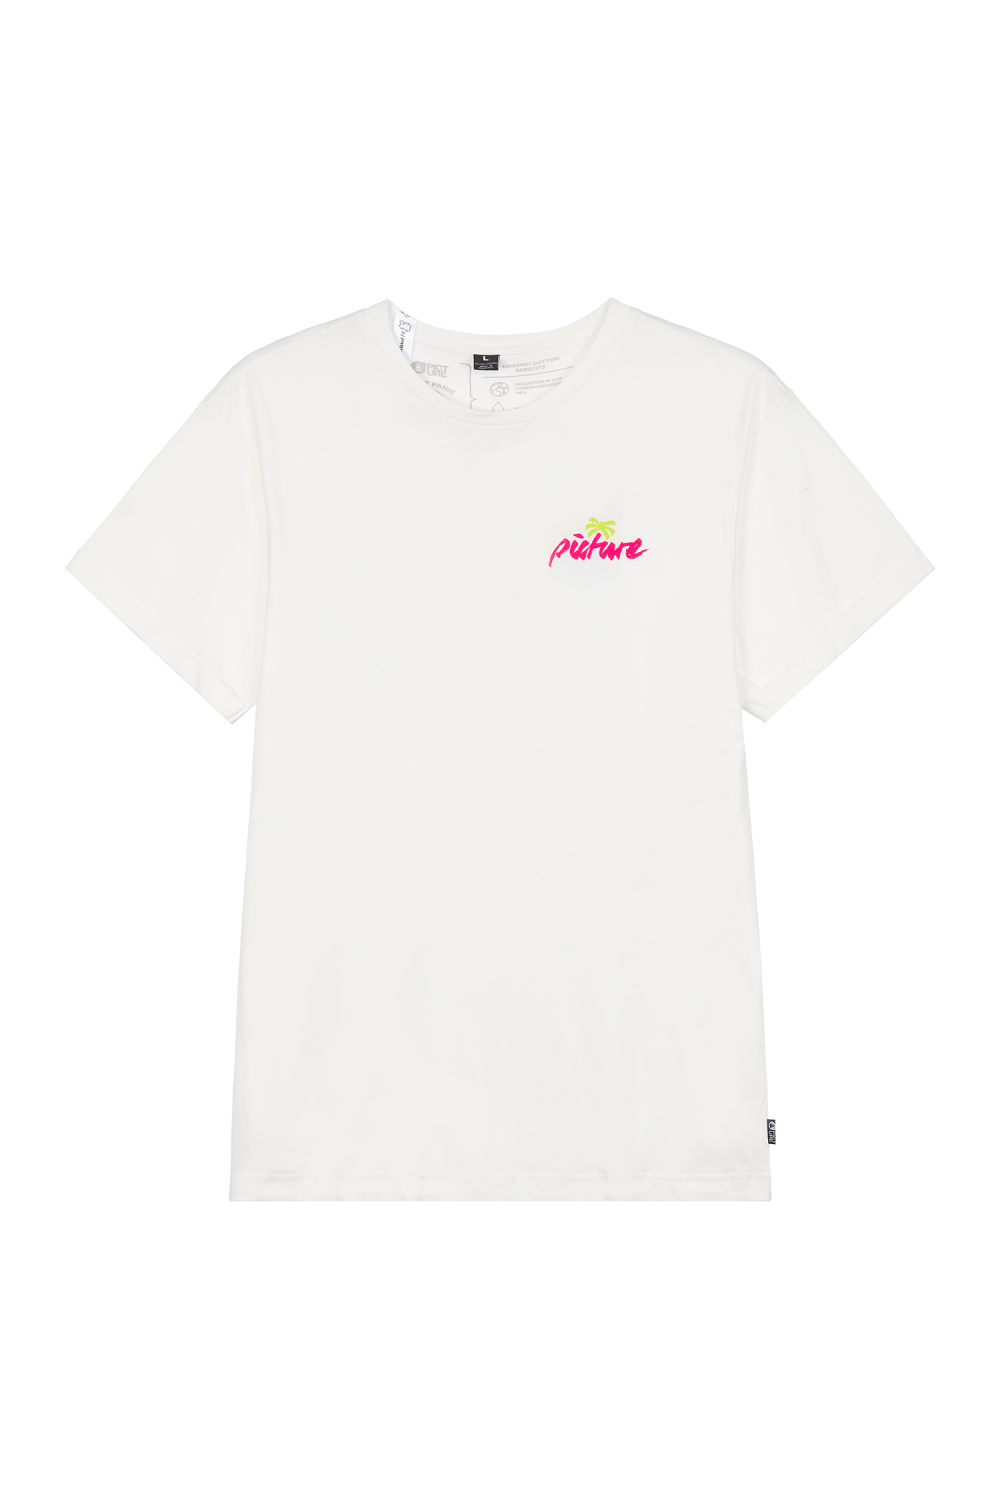 Picture organic clothing T shirt - Mapoon Tee